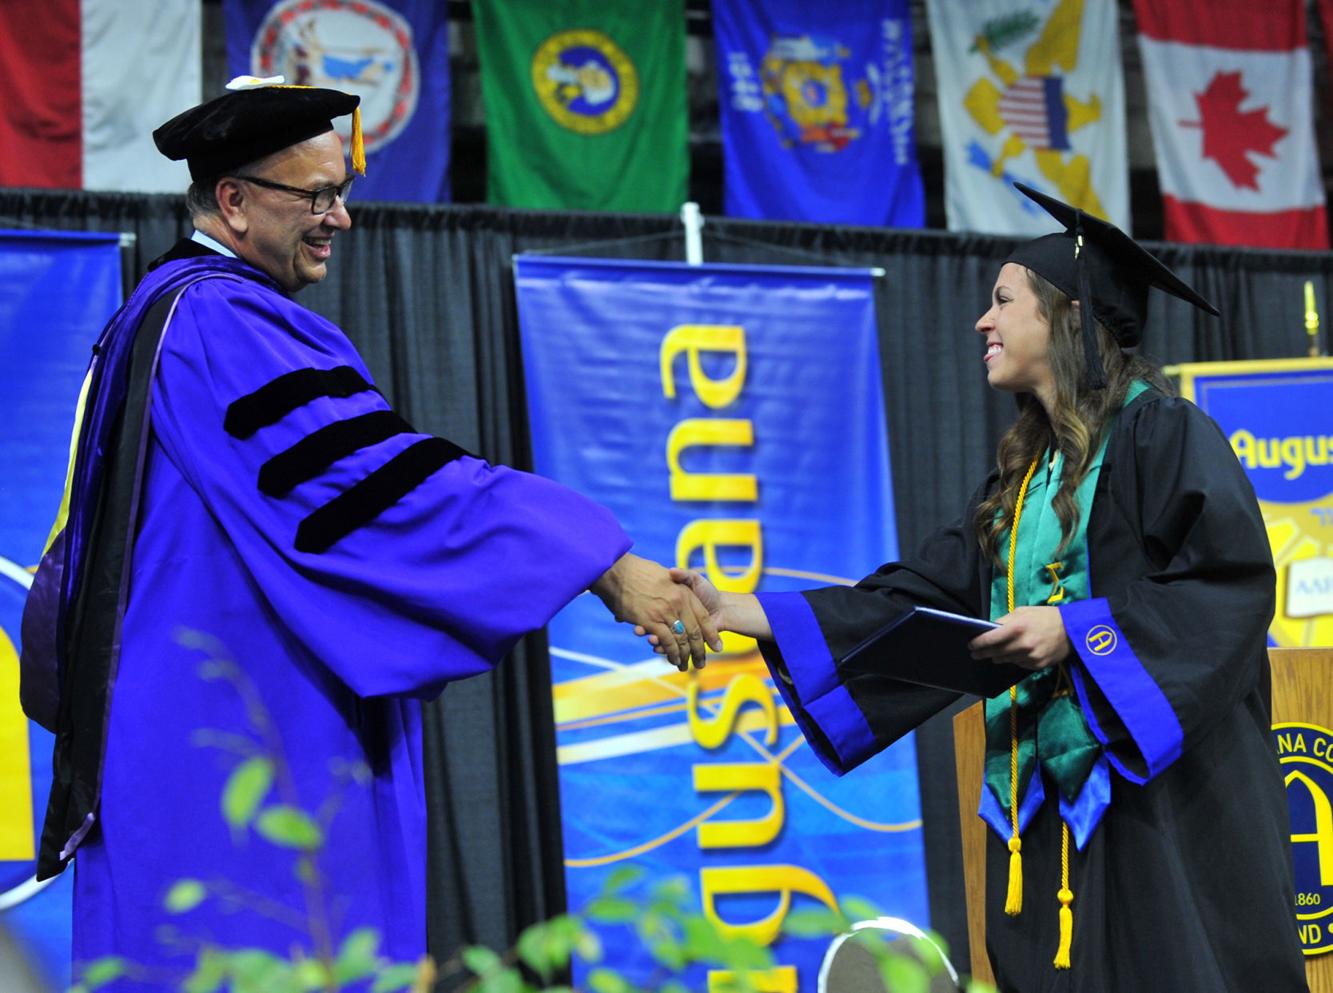 Photos Augustana College Commencement Photo Galleries